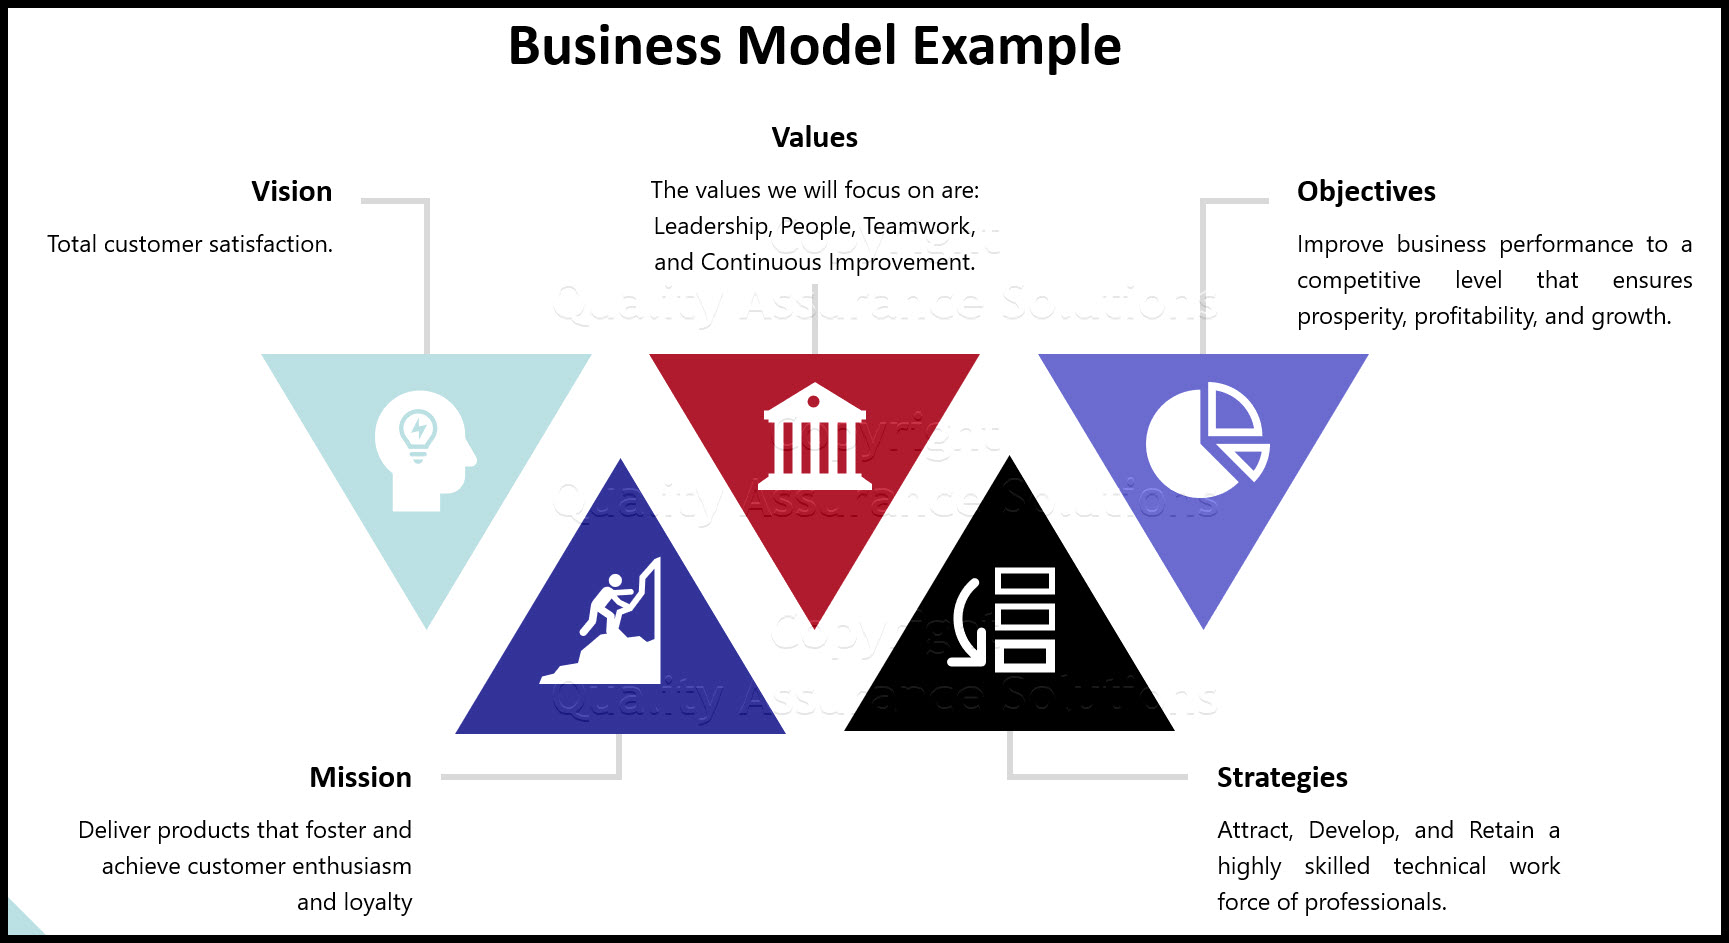 Review a business model template. In addition to the template, you will learn how to create one. We cover important steps and questions to answer when formulating your own business model letter. 